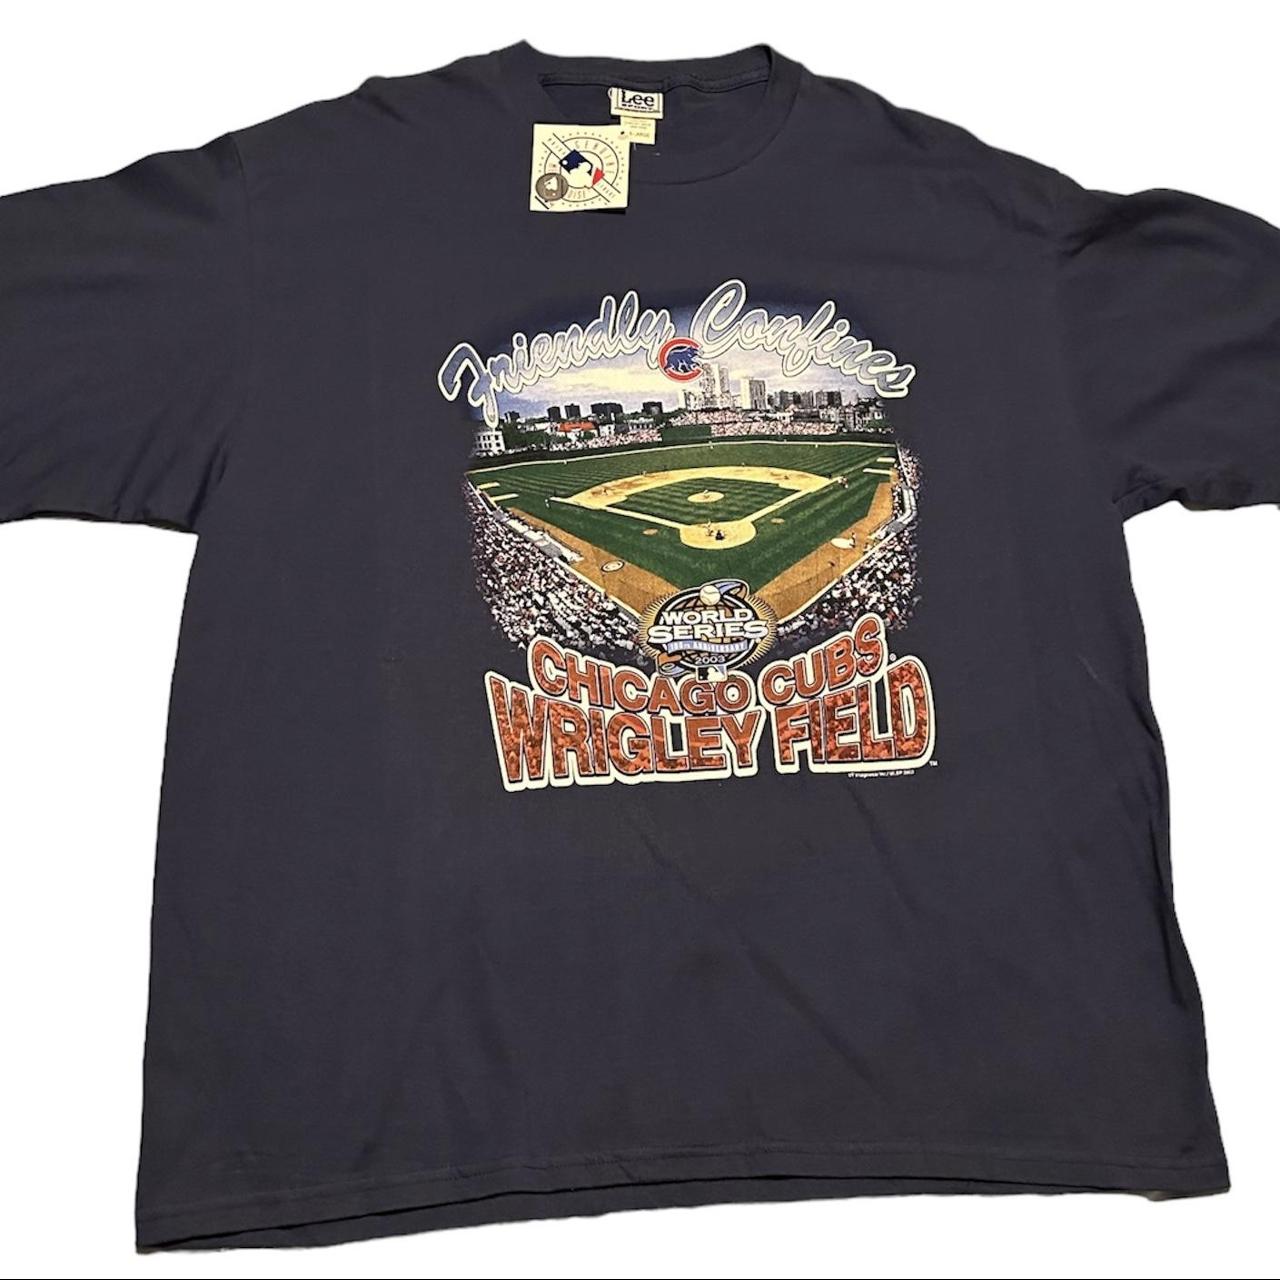 Wright and Diston Chicago Cubs Royal Wrigley Field - Depop